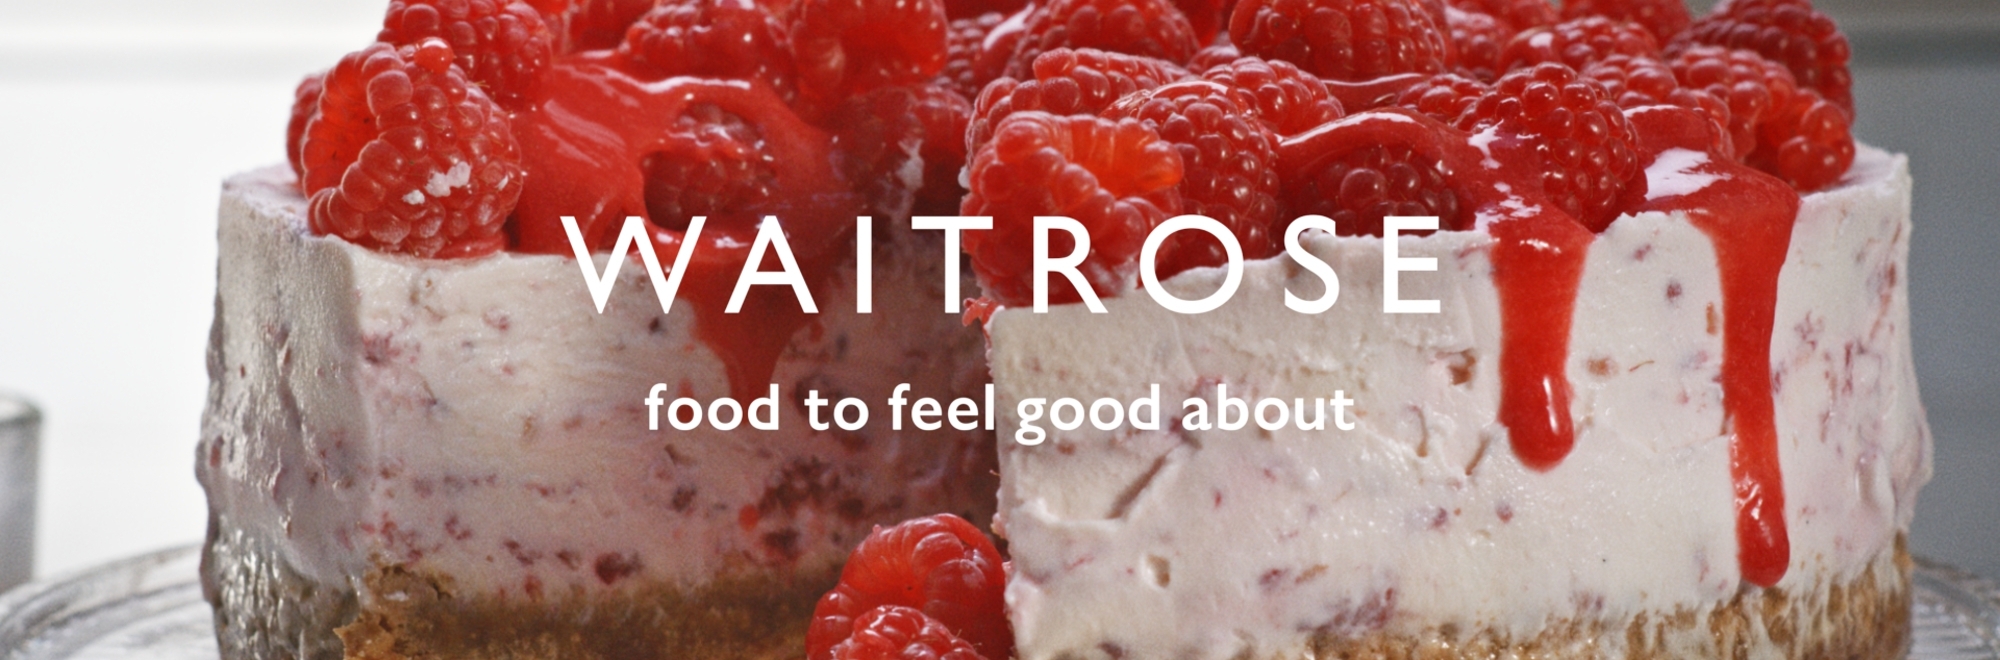 Waitrose launches 'Food to Feel Good About' celebrating food that makes a positive difference